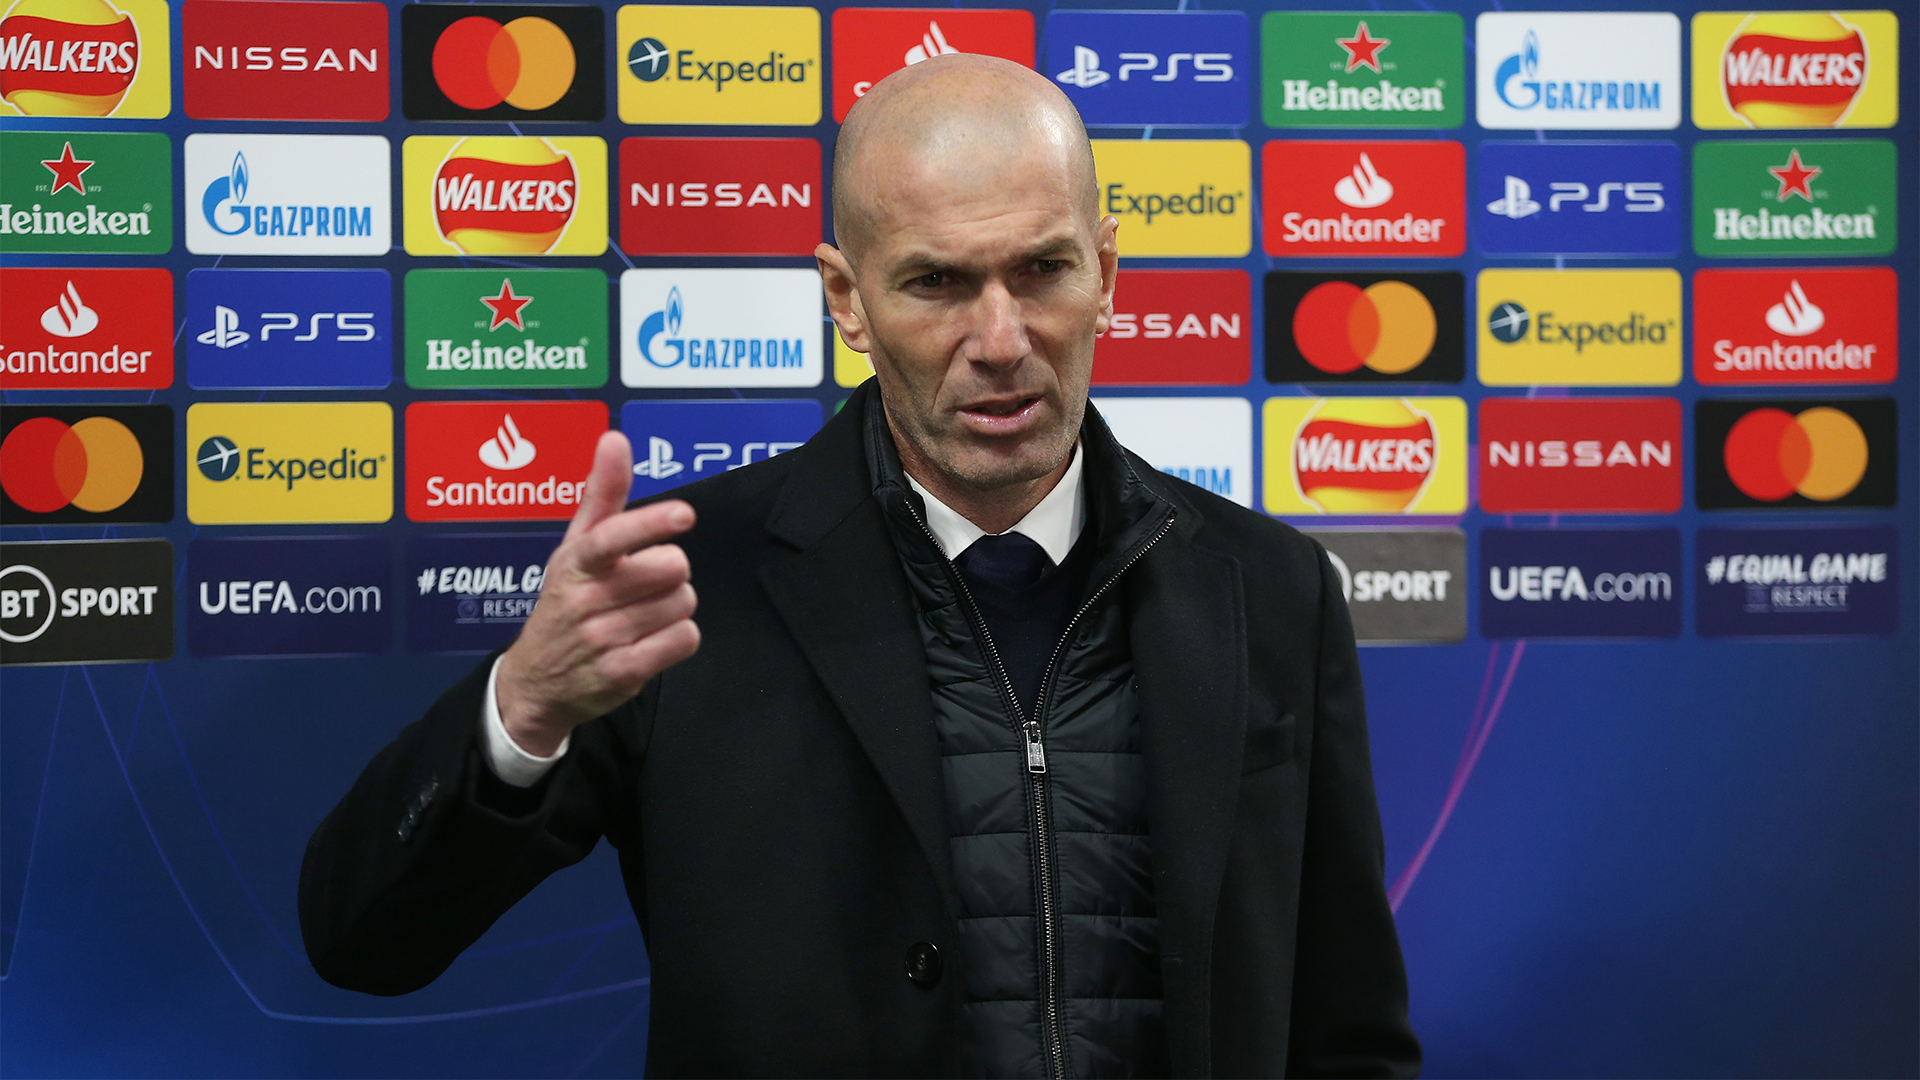 Bayern Munich announced that Tuchel would leave, and Zidane is among the top candidates to replace him, but he’d be equally keen on managing Juventus.